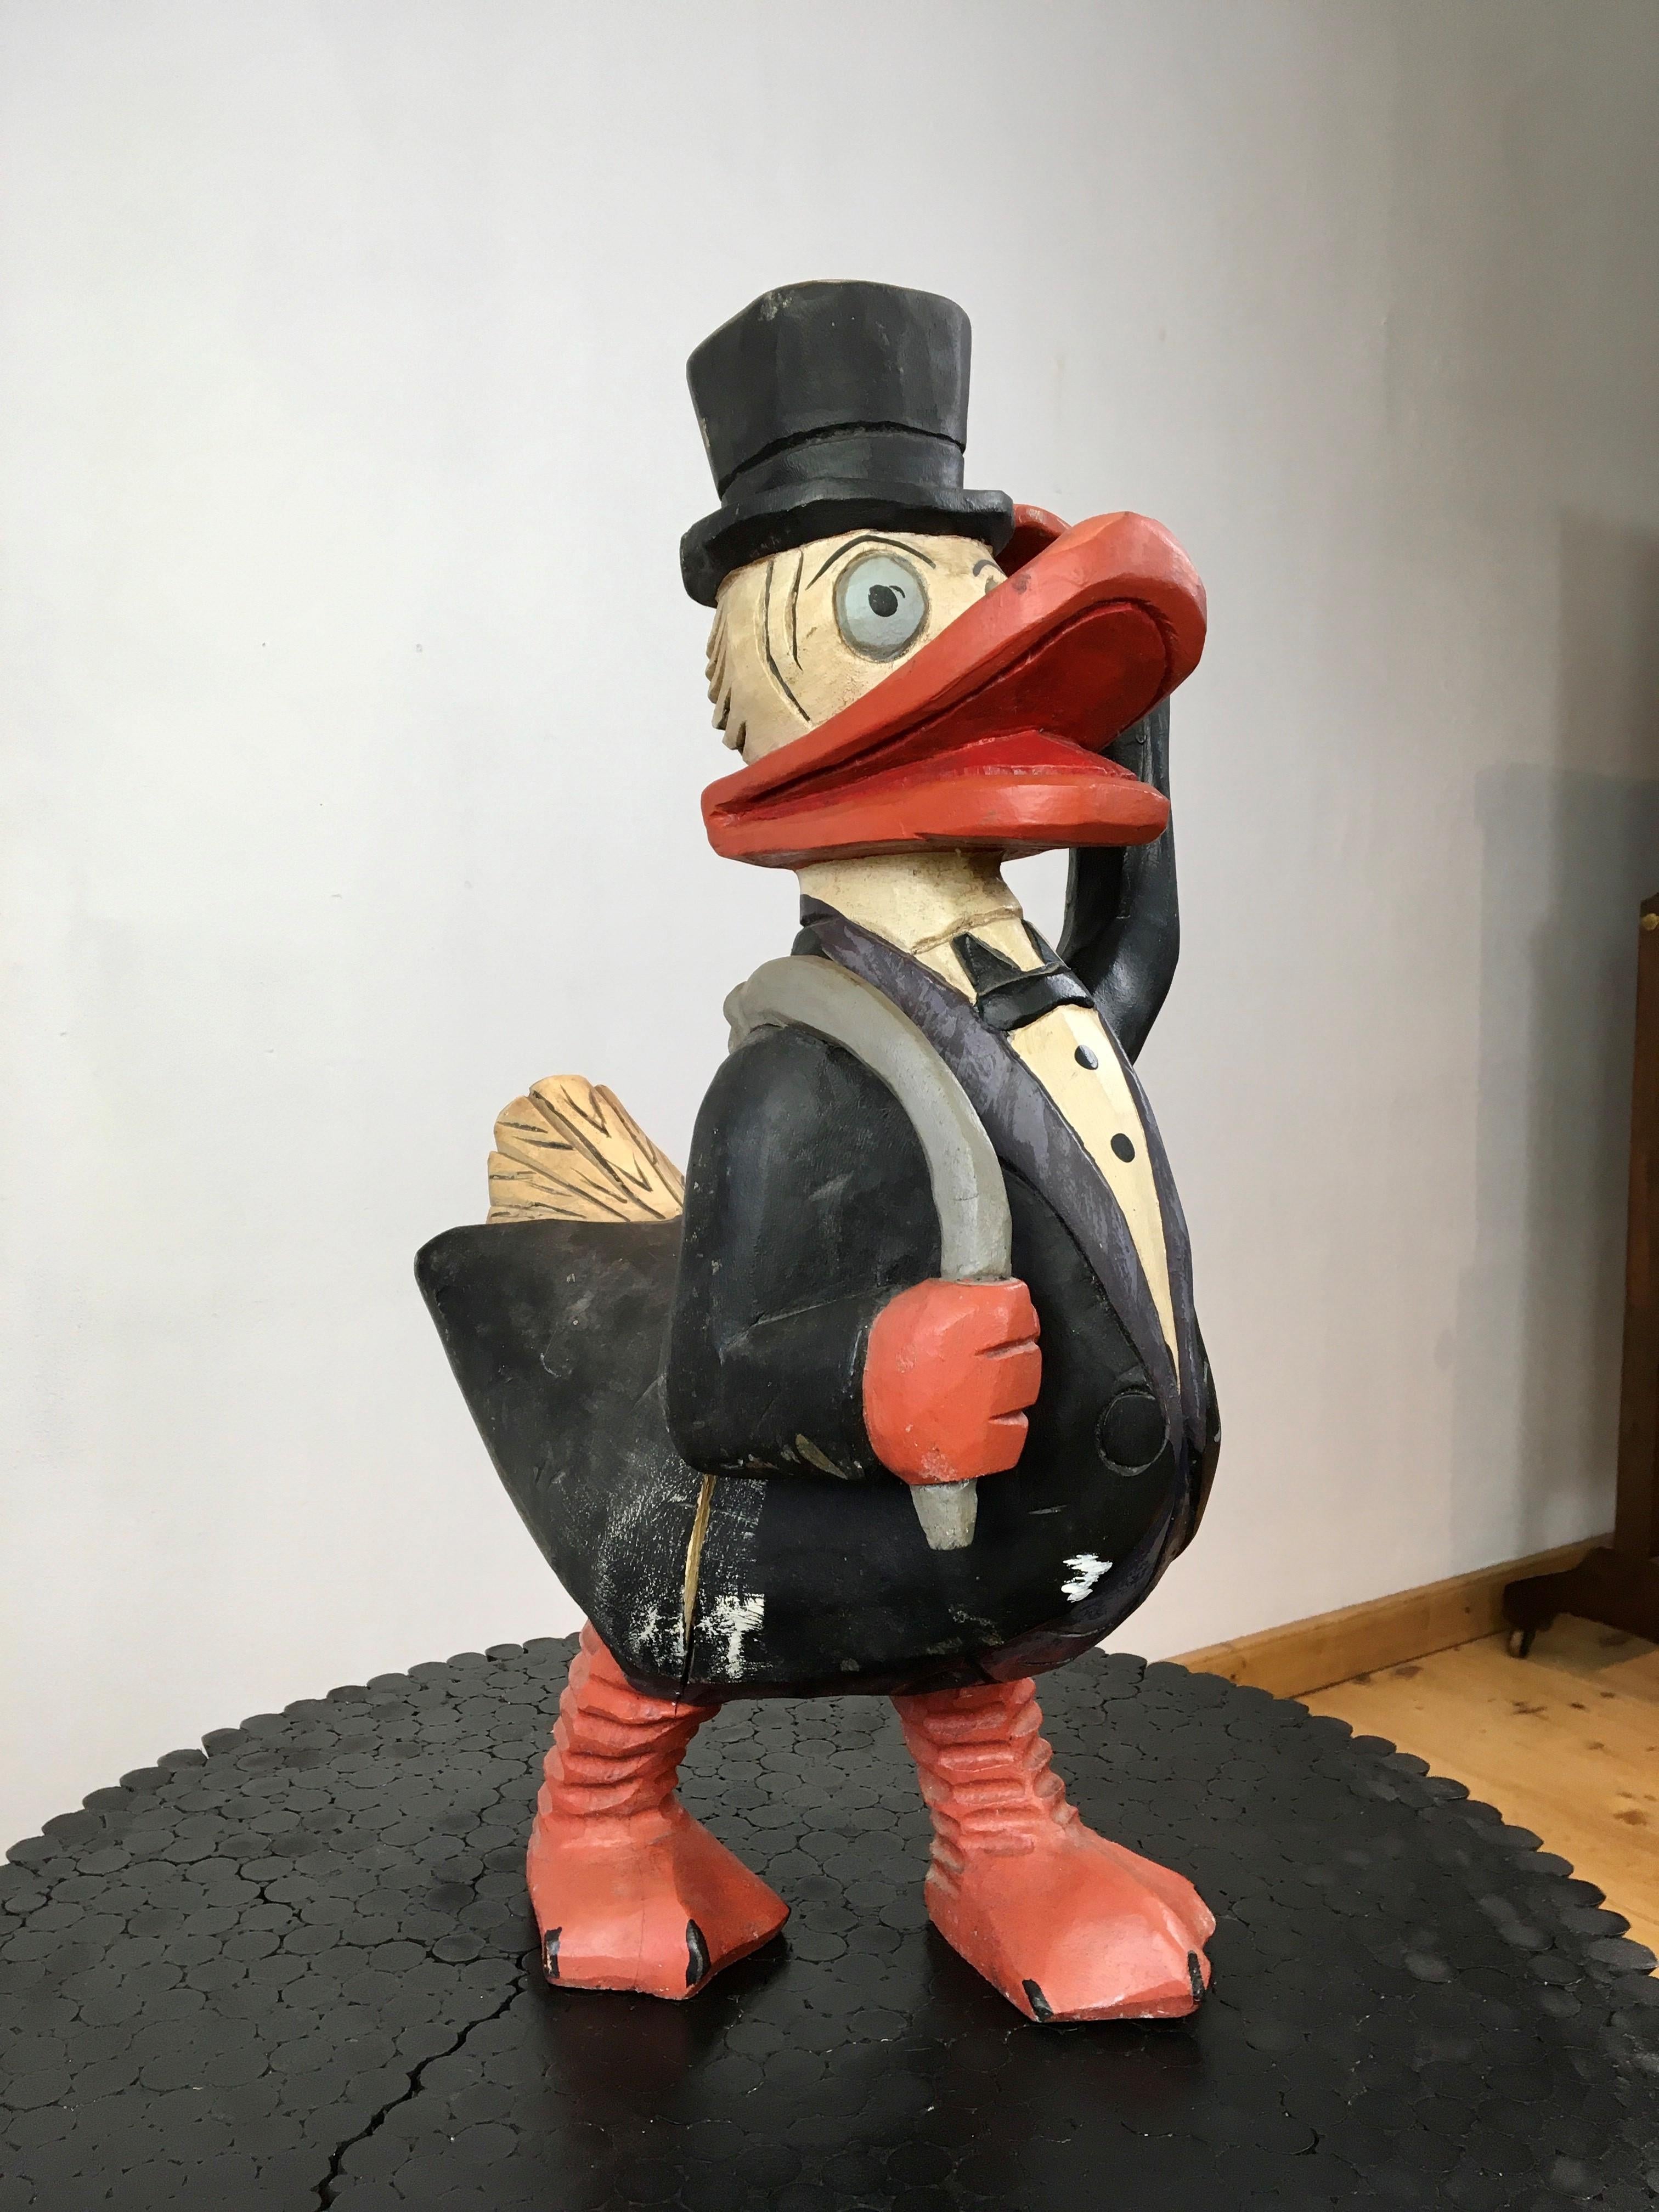 Scrooge McDuck - Dagobert Duck sculpture. 
Cartoon character created in 1947 for Walt Disney and especially known due his famous nephew Donald Duck. 

This painted wooden sculpture is a great decorative object for someone who loves Walt Disney,